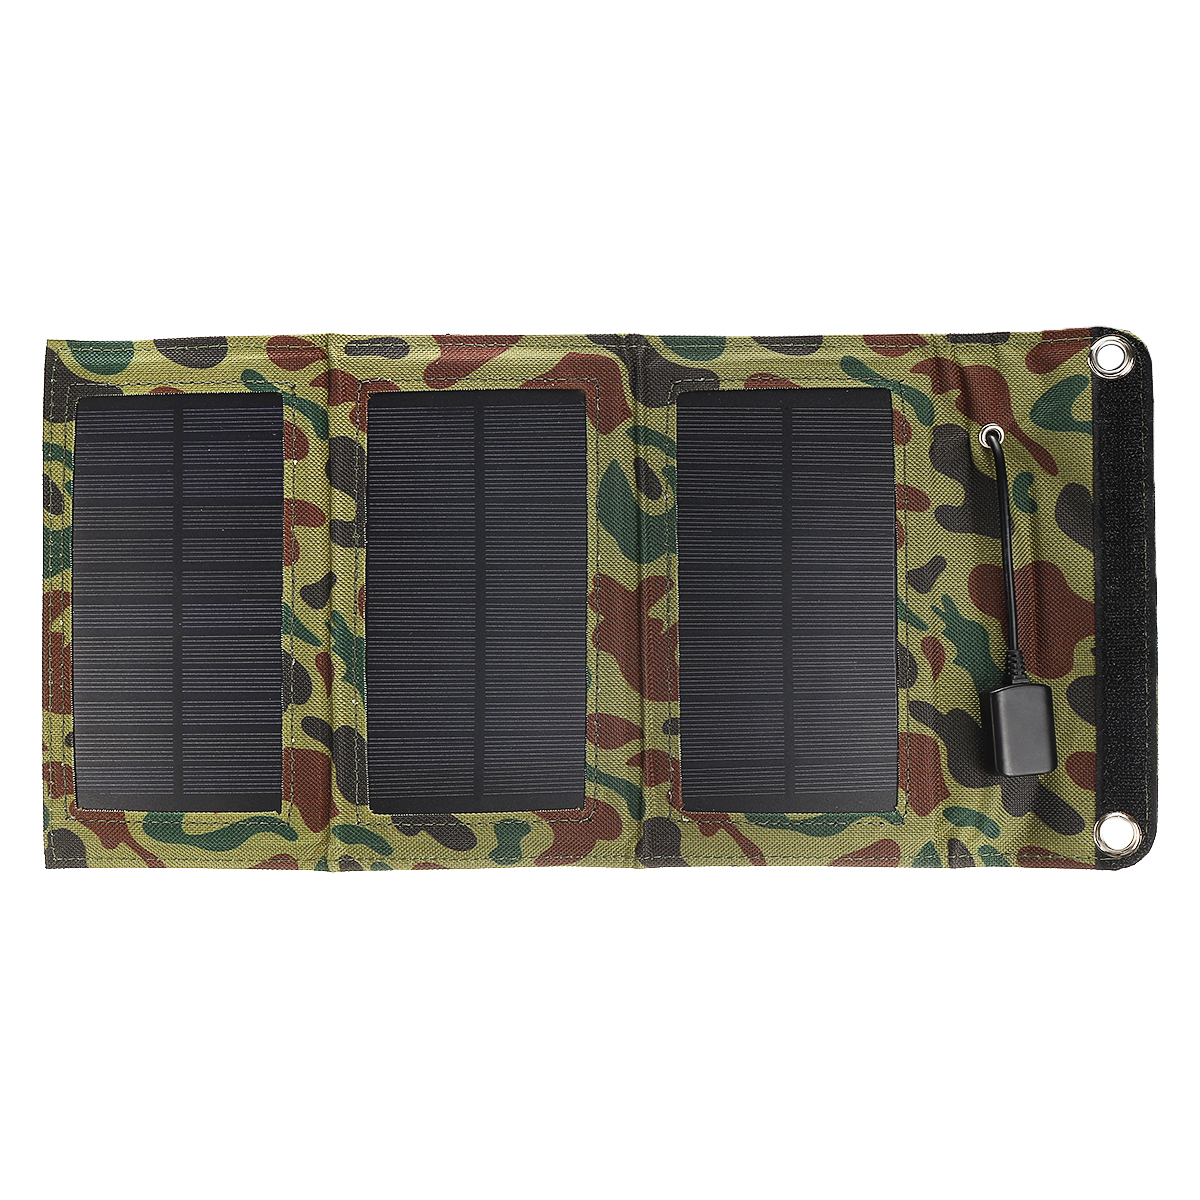 

7.5W 5.5V Waterproof Portable Foldable Solar Panel Charger with USB Port